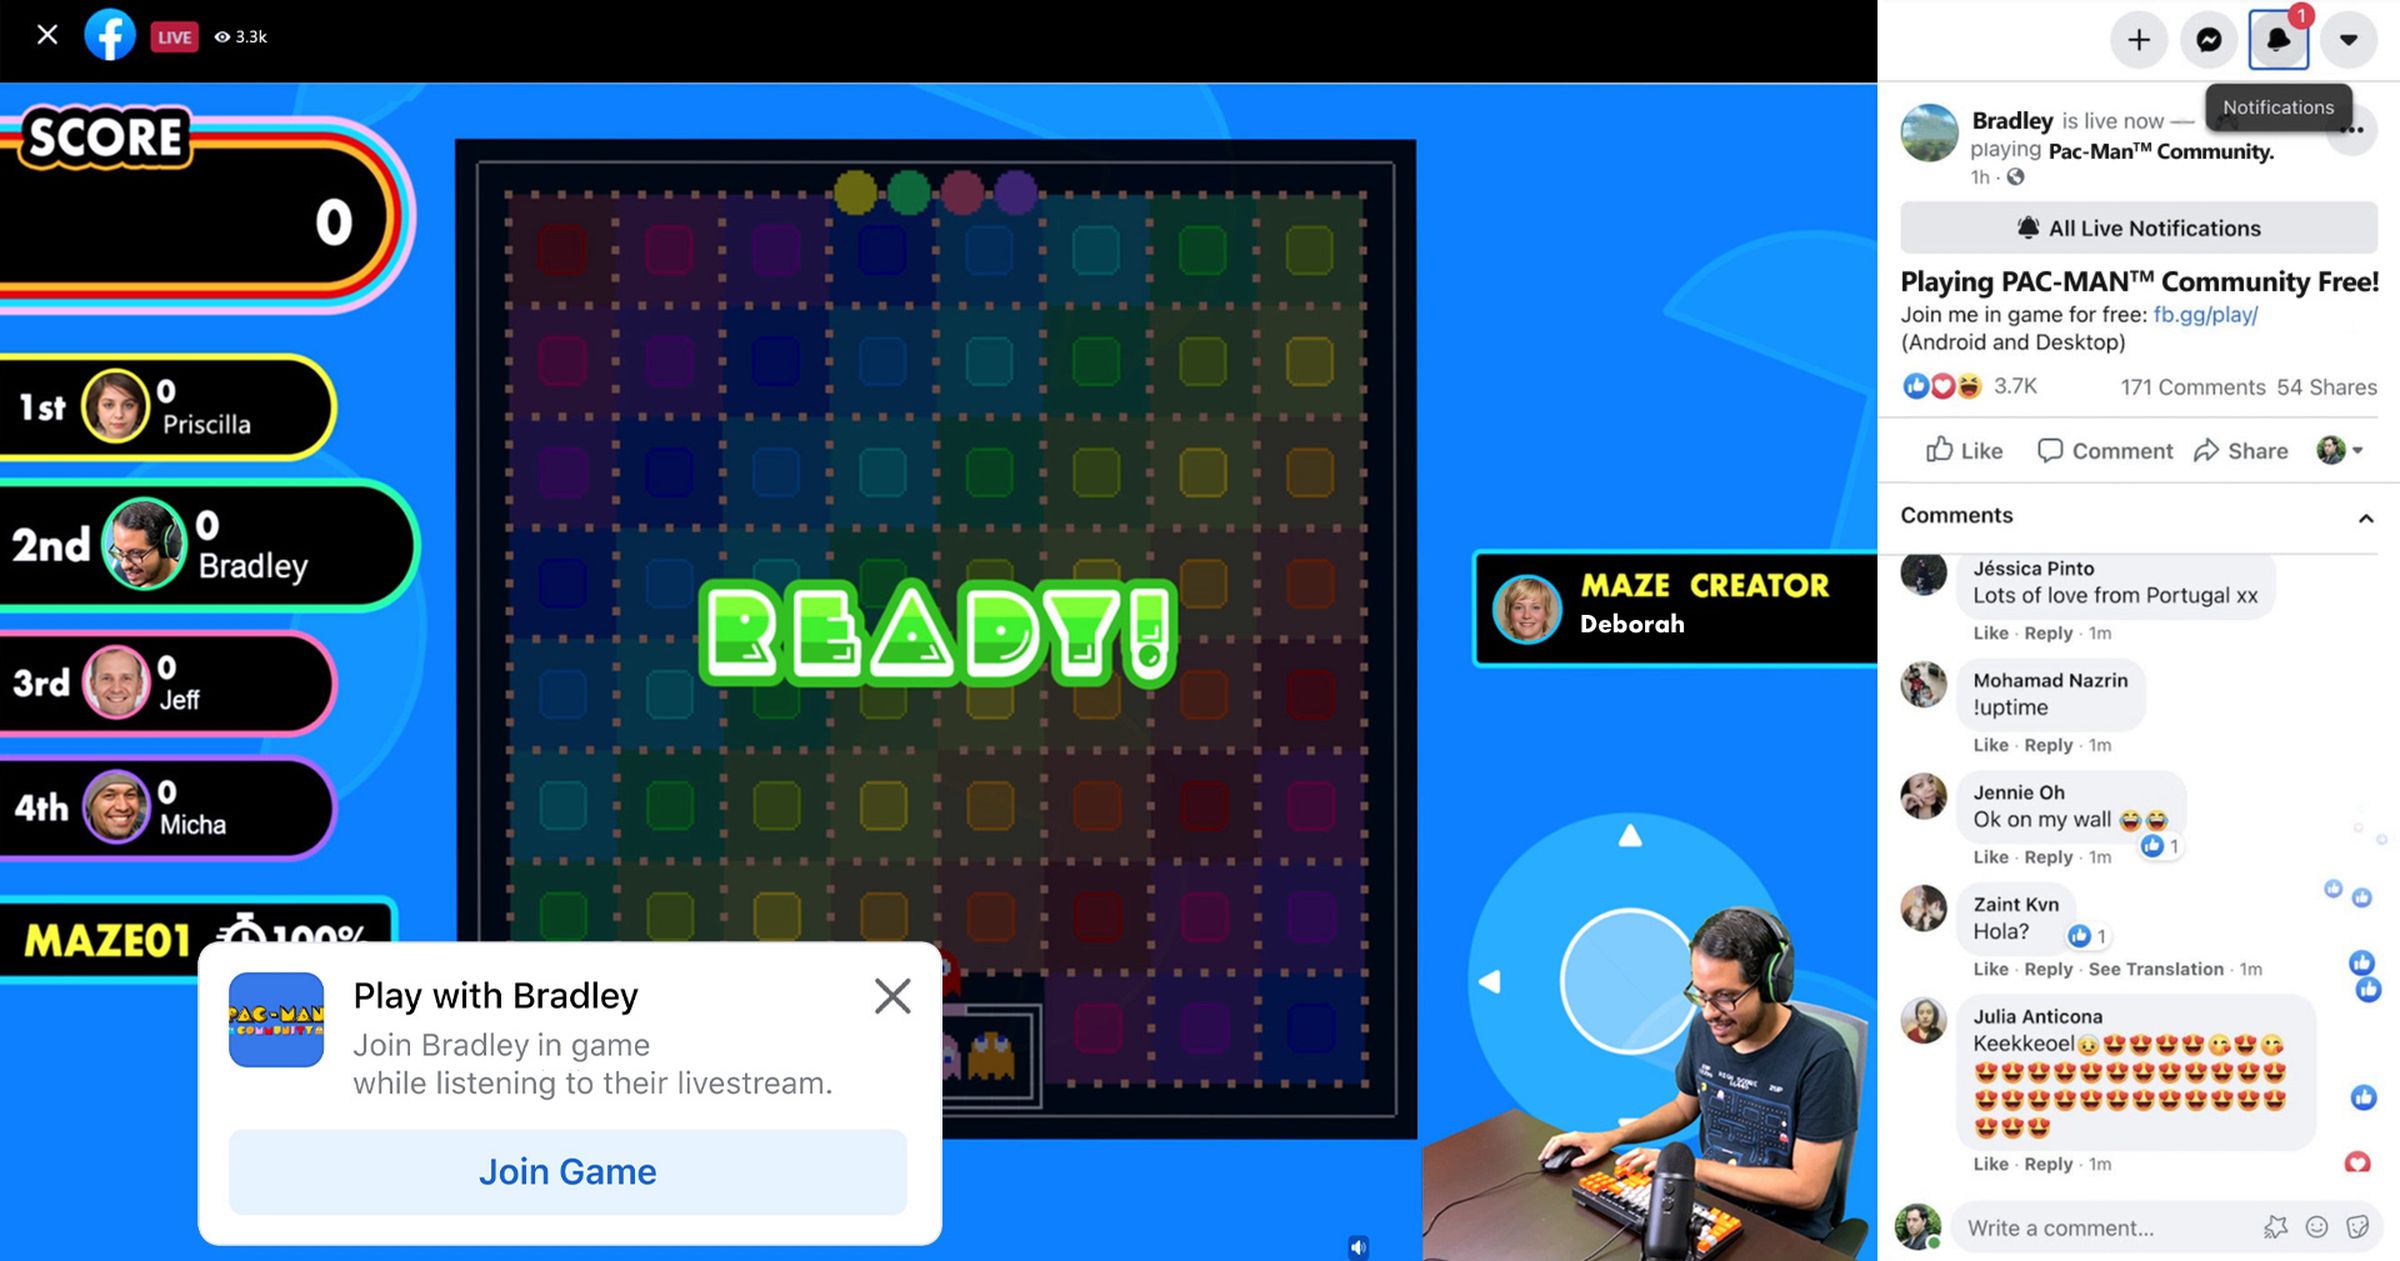 You can join a Pac-Man Community game right from a livestream.